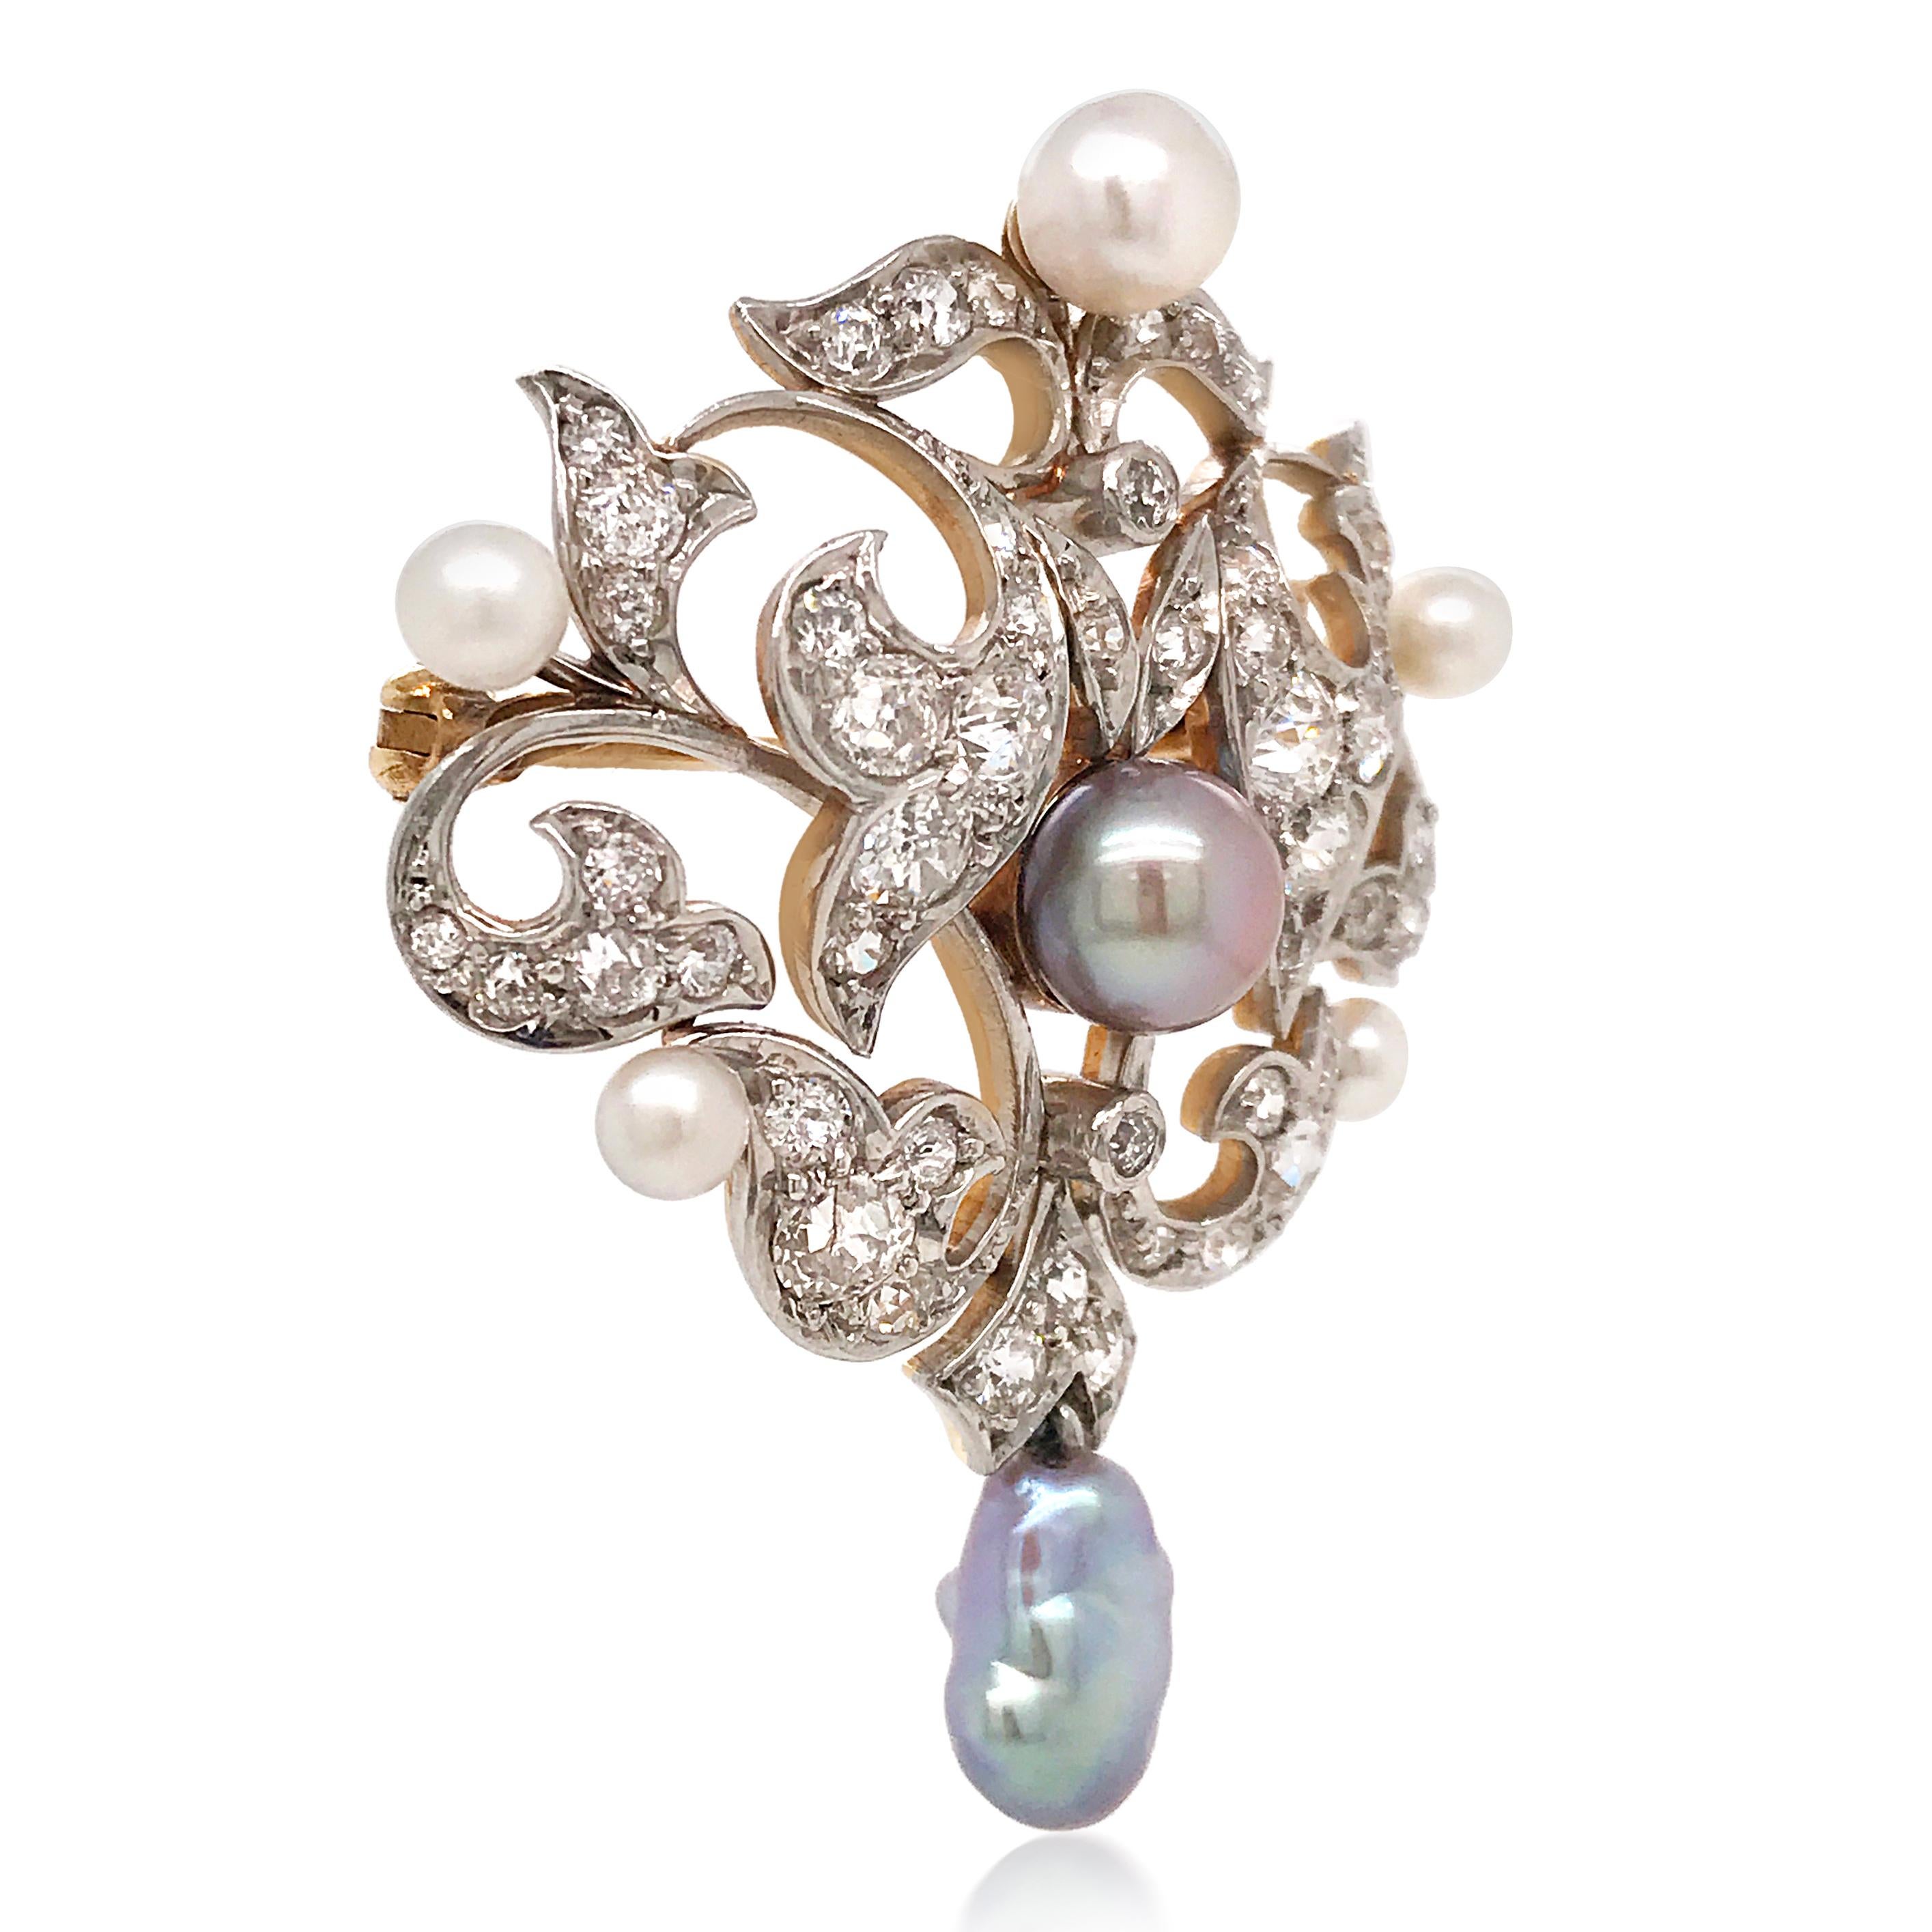 This alluring Victorian pin brooch of opulent aesthetic is crafted in gold-topped platinum, centered with a lustrous gray pearl, measuring 7.12mm in diameter. It is also adorned with 5 white pearls on top and sides of the brooch, measuring from